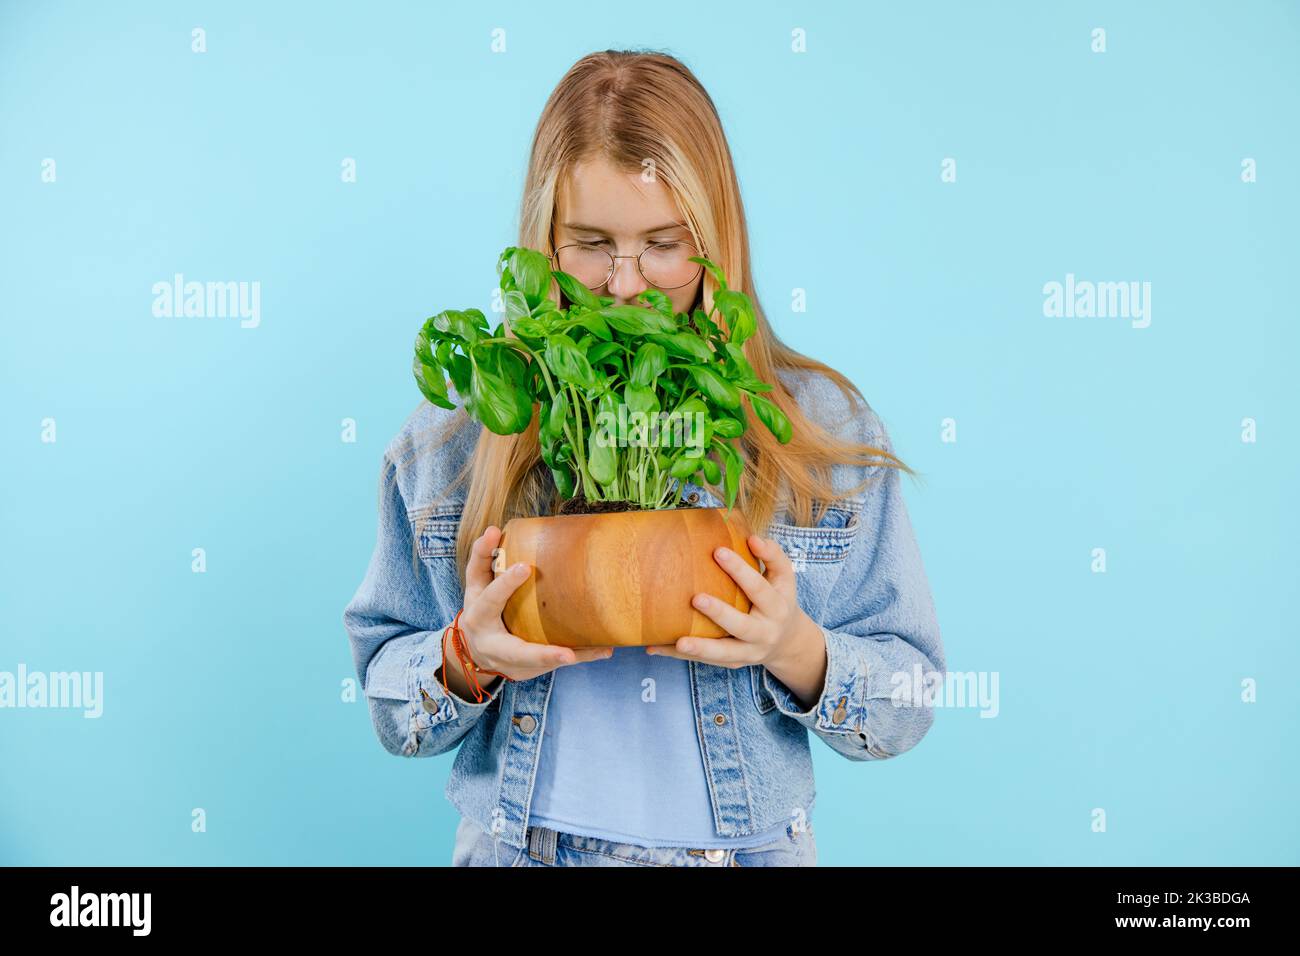 Portrait of teenage girl with long fair hair wearing denim clothes, glasses holding brown pot with growing green basil. Stock Photo